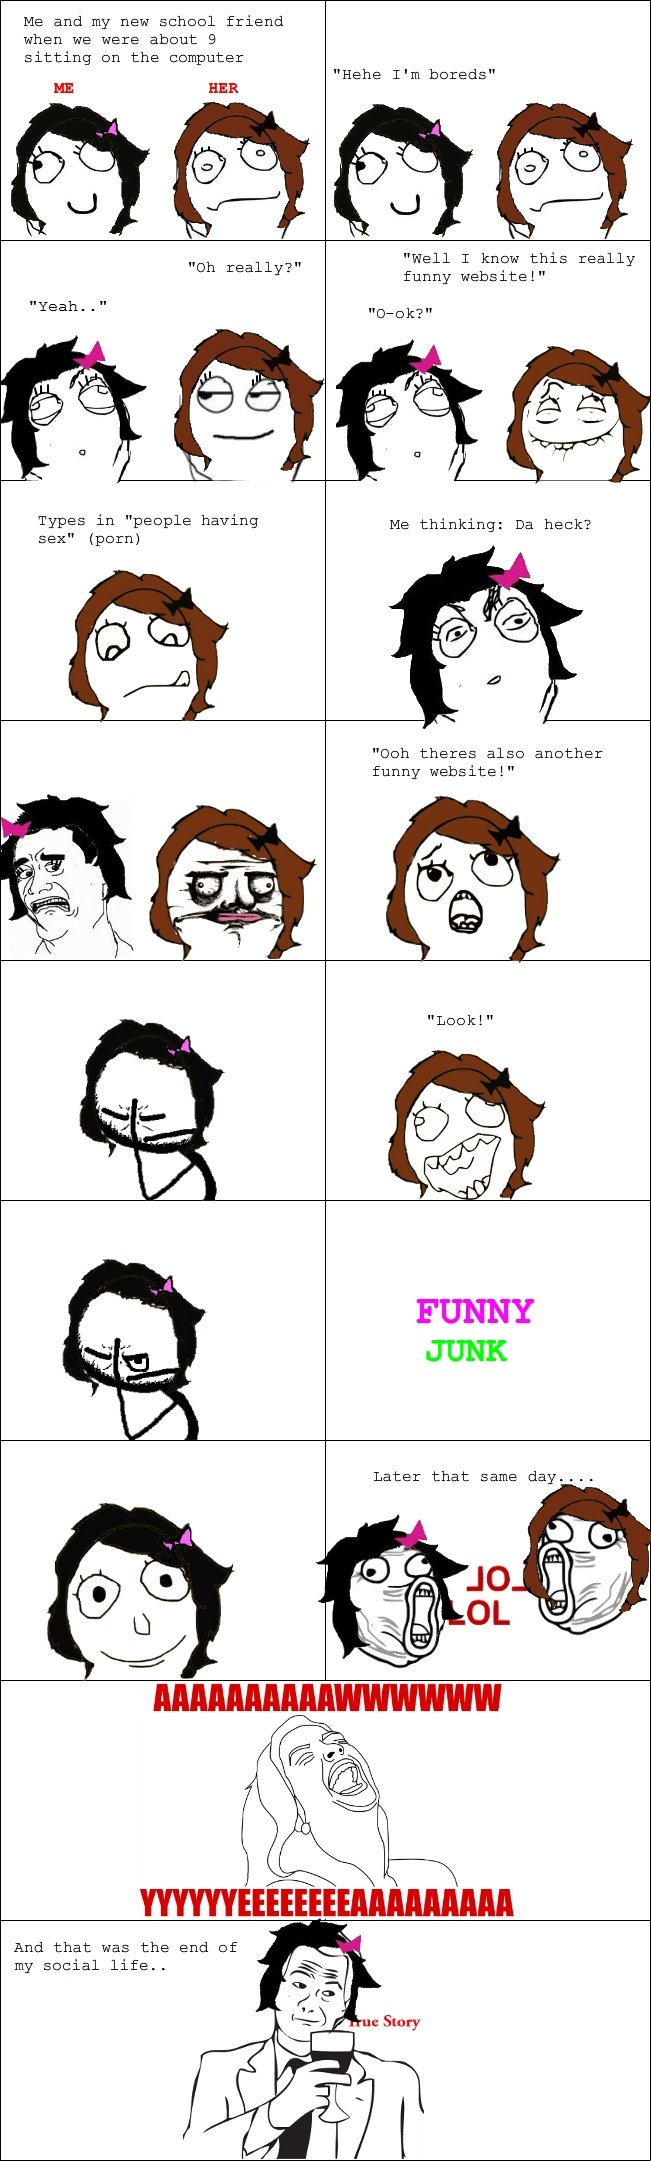 How I discovered Funny Junk OC. Just for the lulz only thumb if you feel like it bro . Me and my new school friend when we were about 9 sitting en the ocmputer 